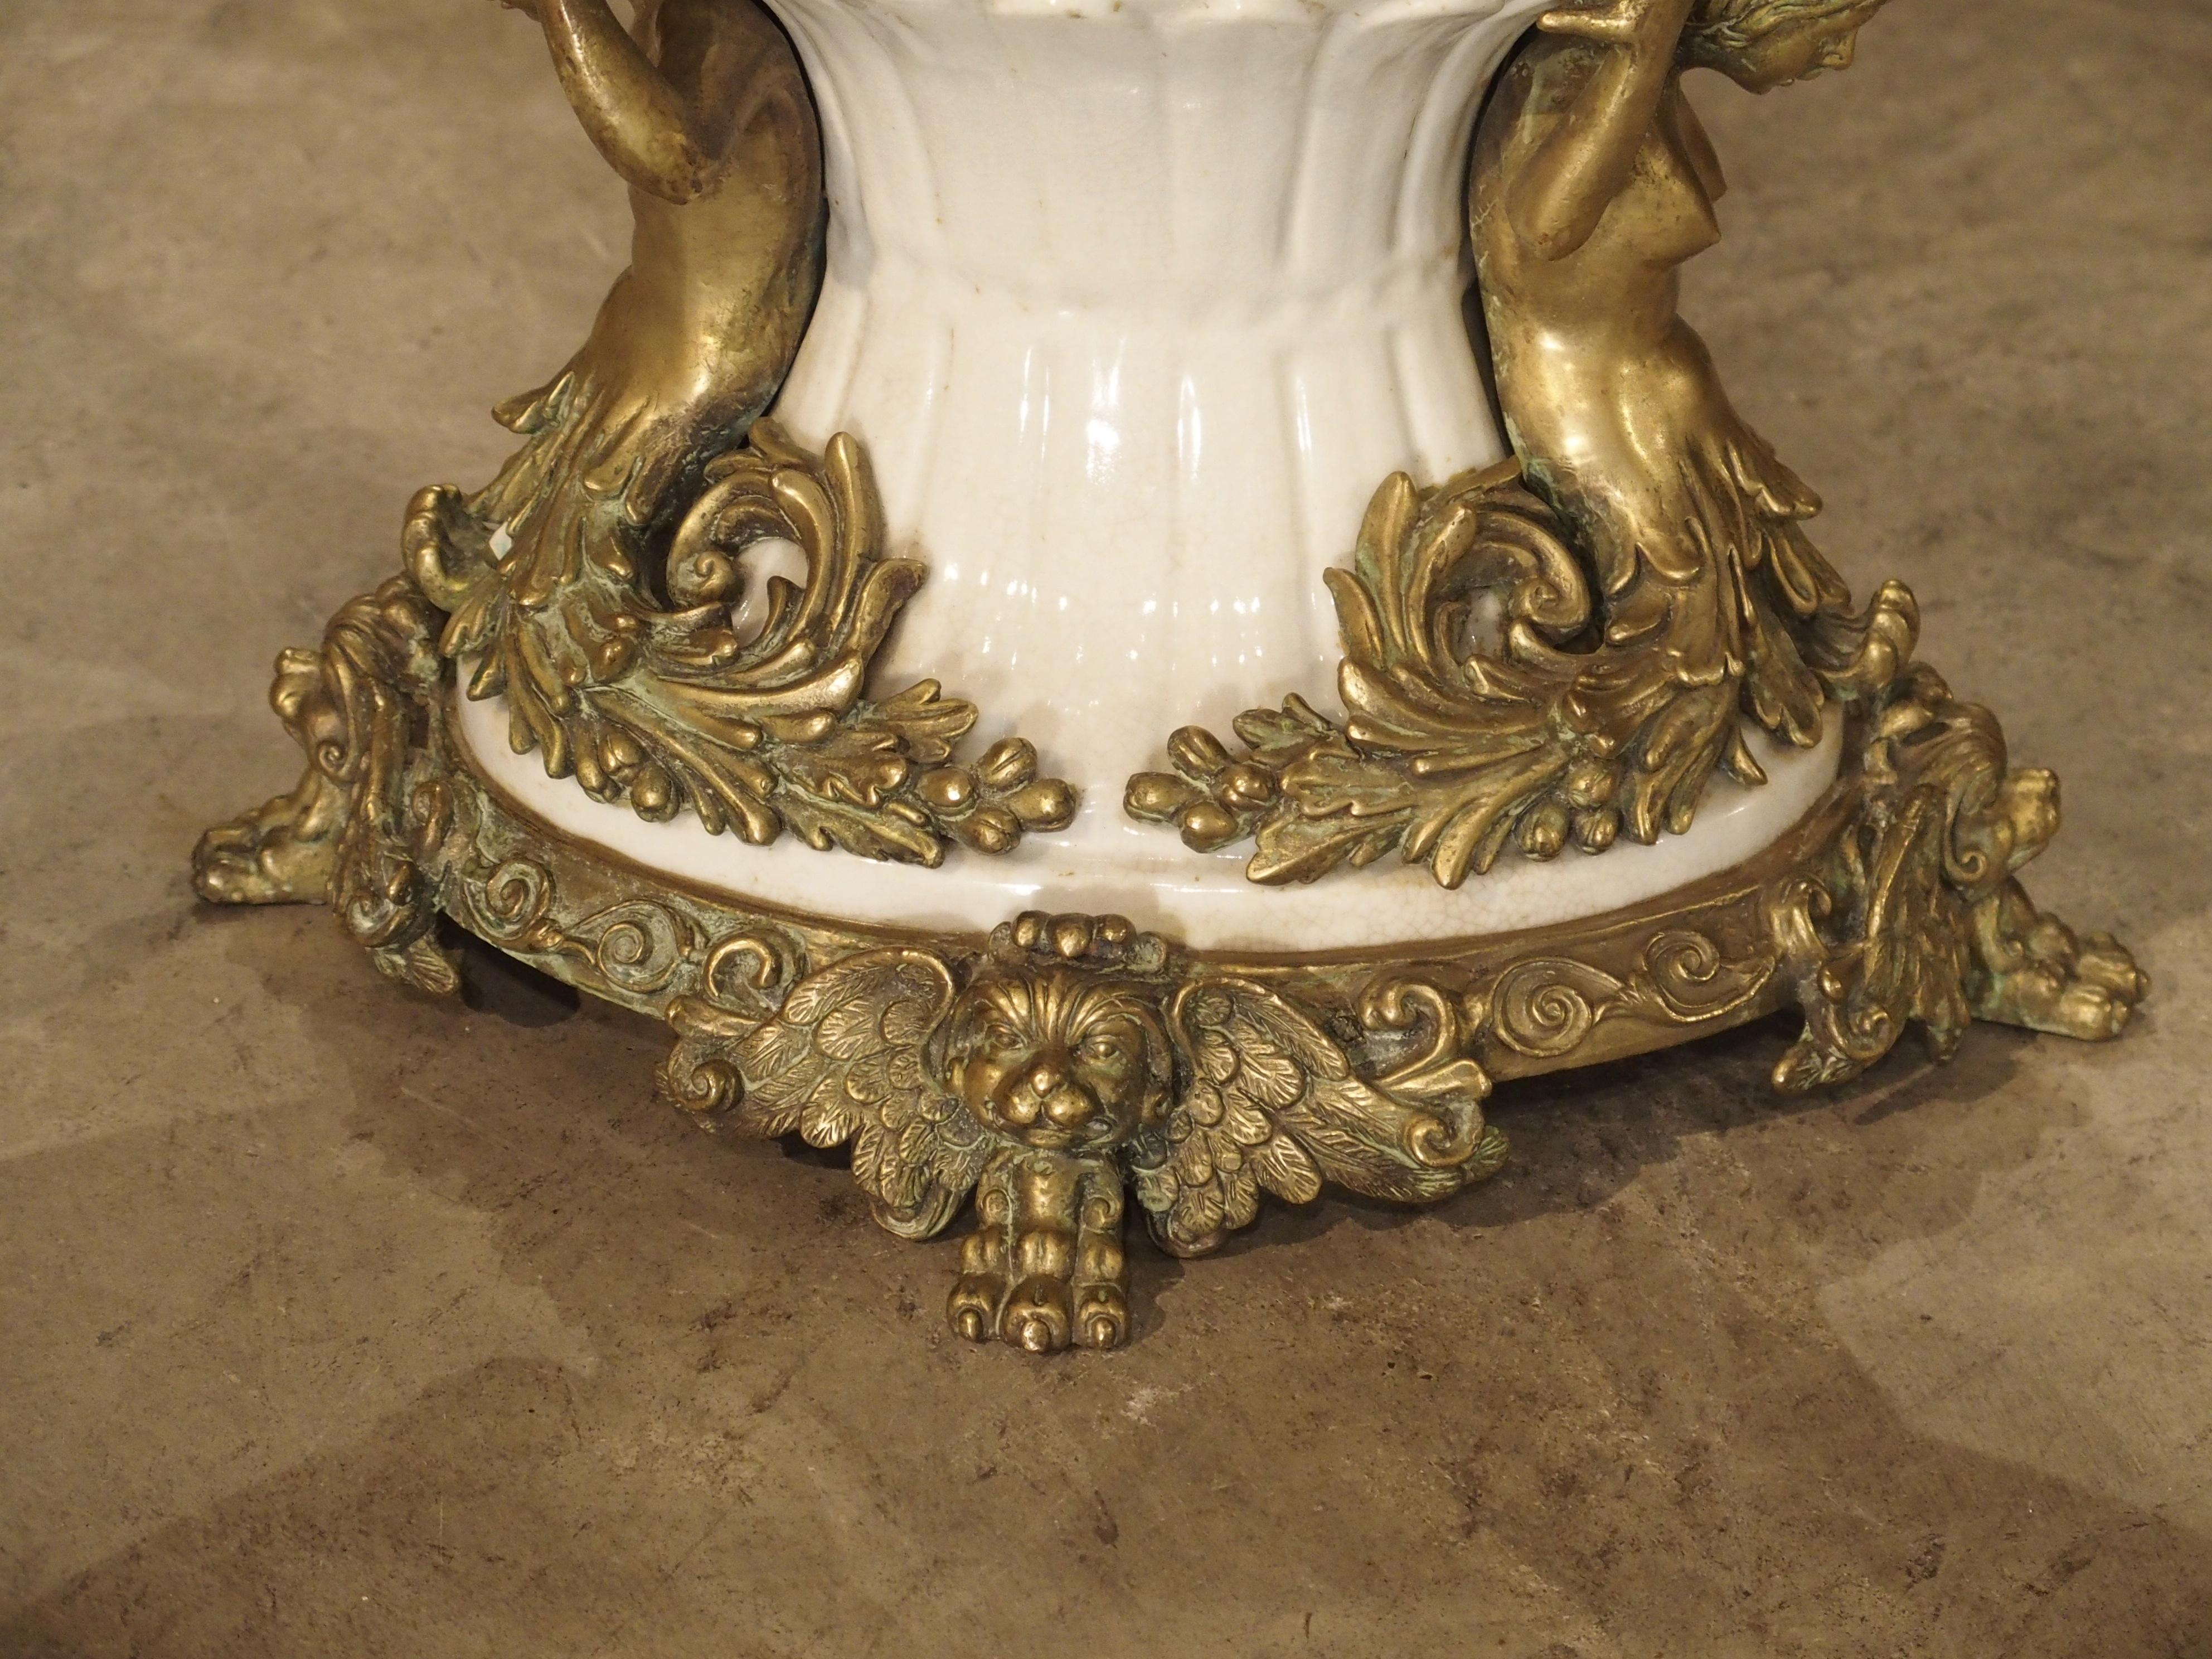 White Faience Urn with Gilt Bronze-Mounted Horses from France, circa 1900 13